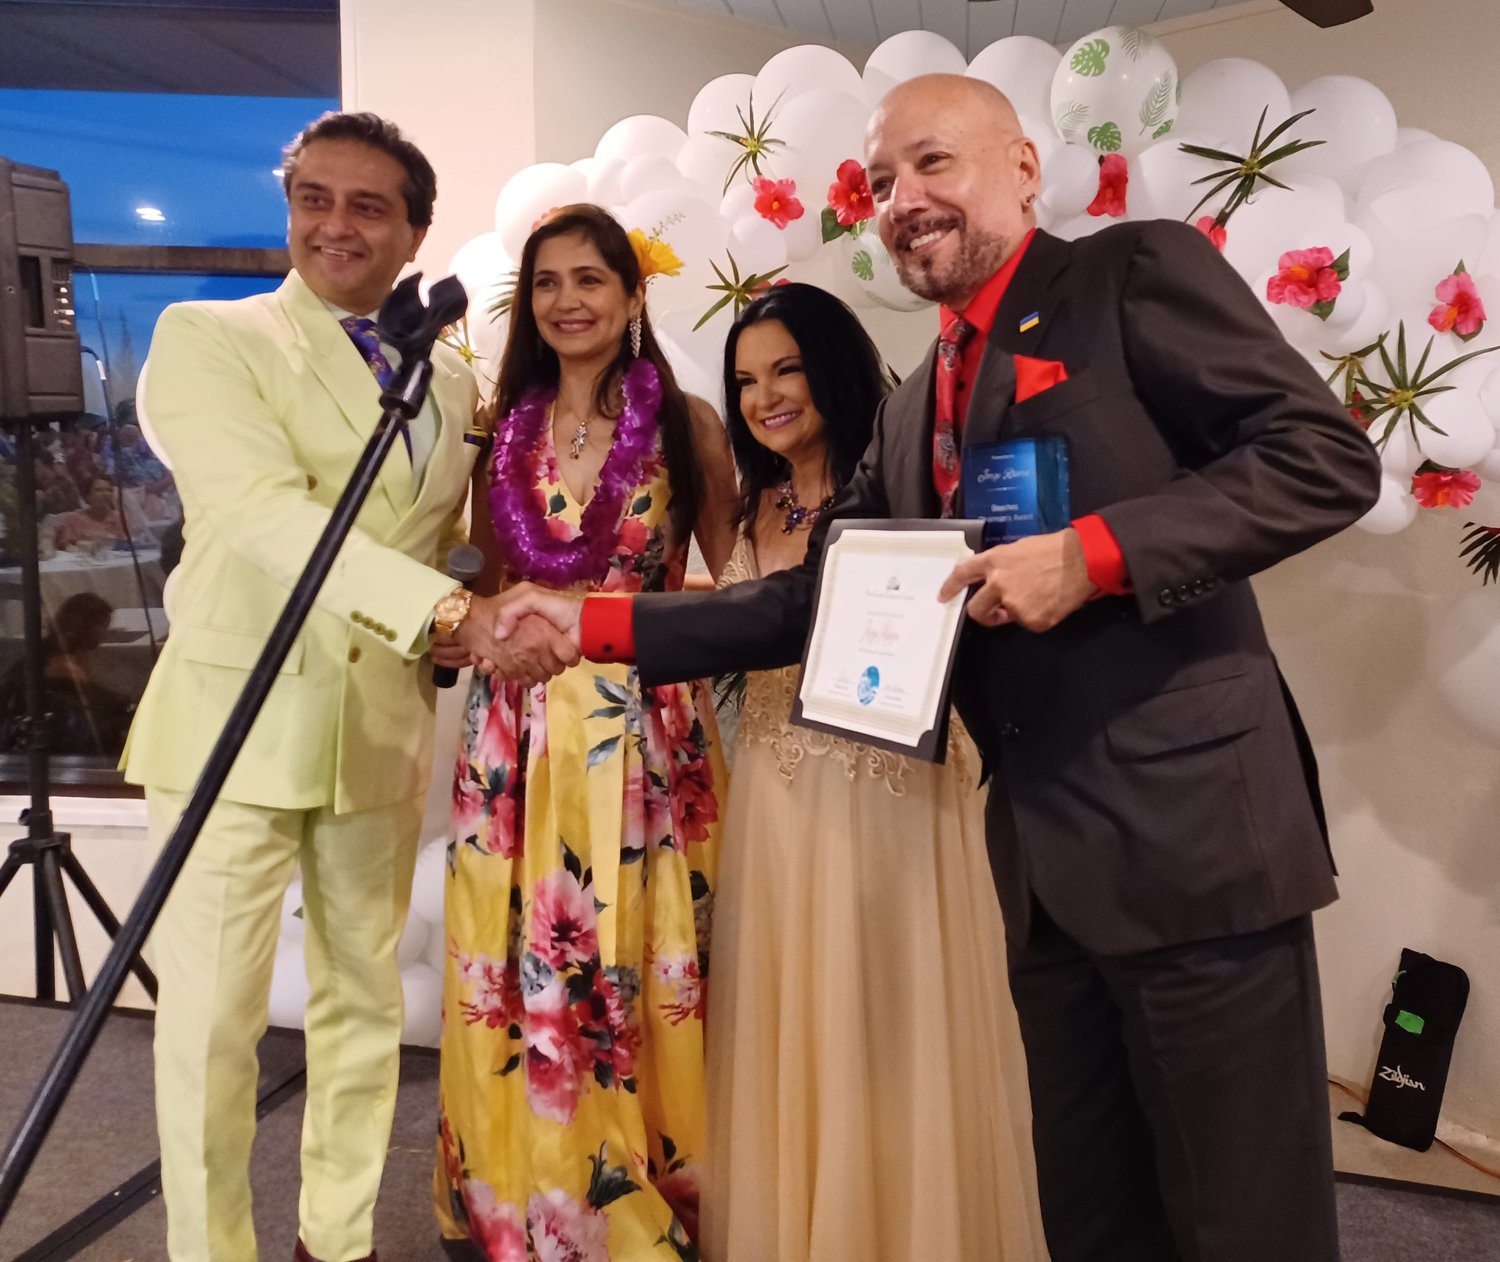 Dr. Arun Gulani, left, congratulates Jorge Rivera on winning the Chairman’s Award at Beaches, A Celebration of the Arts on Sunday, May 15. Also pictured are co-chair Dr. Suparna Gulani, center left, and First Coast Cultural Center Executive Director Donna Guzzo.